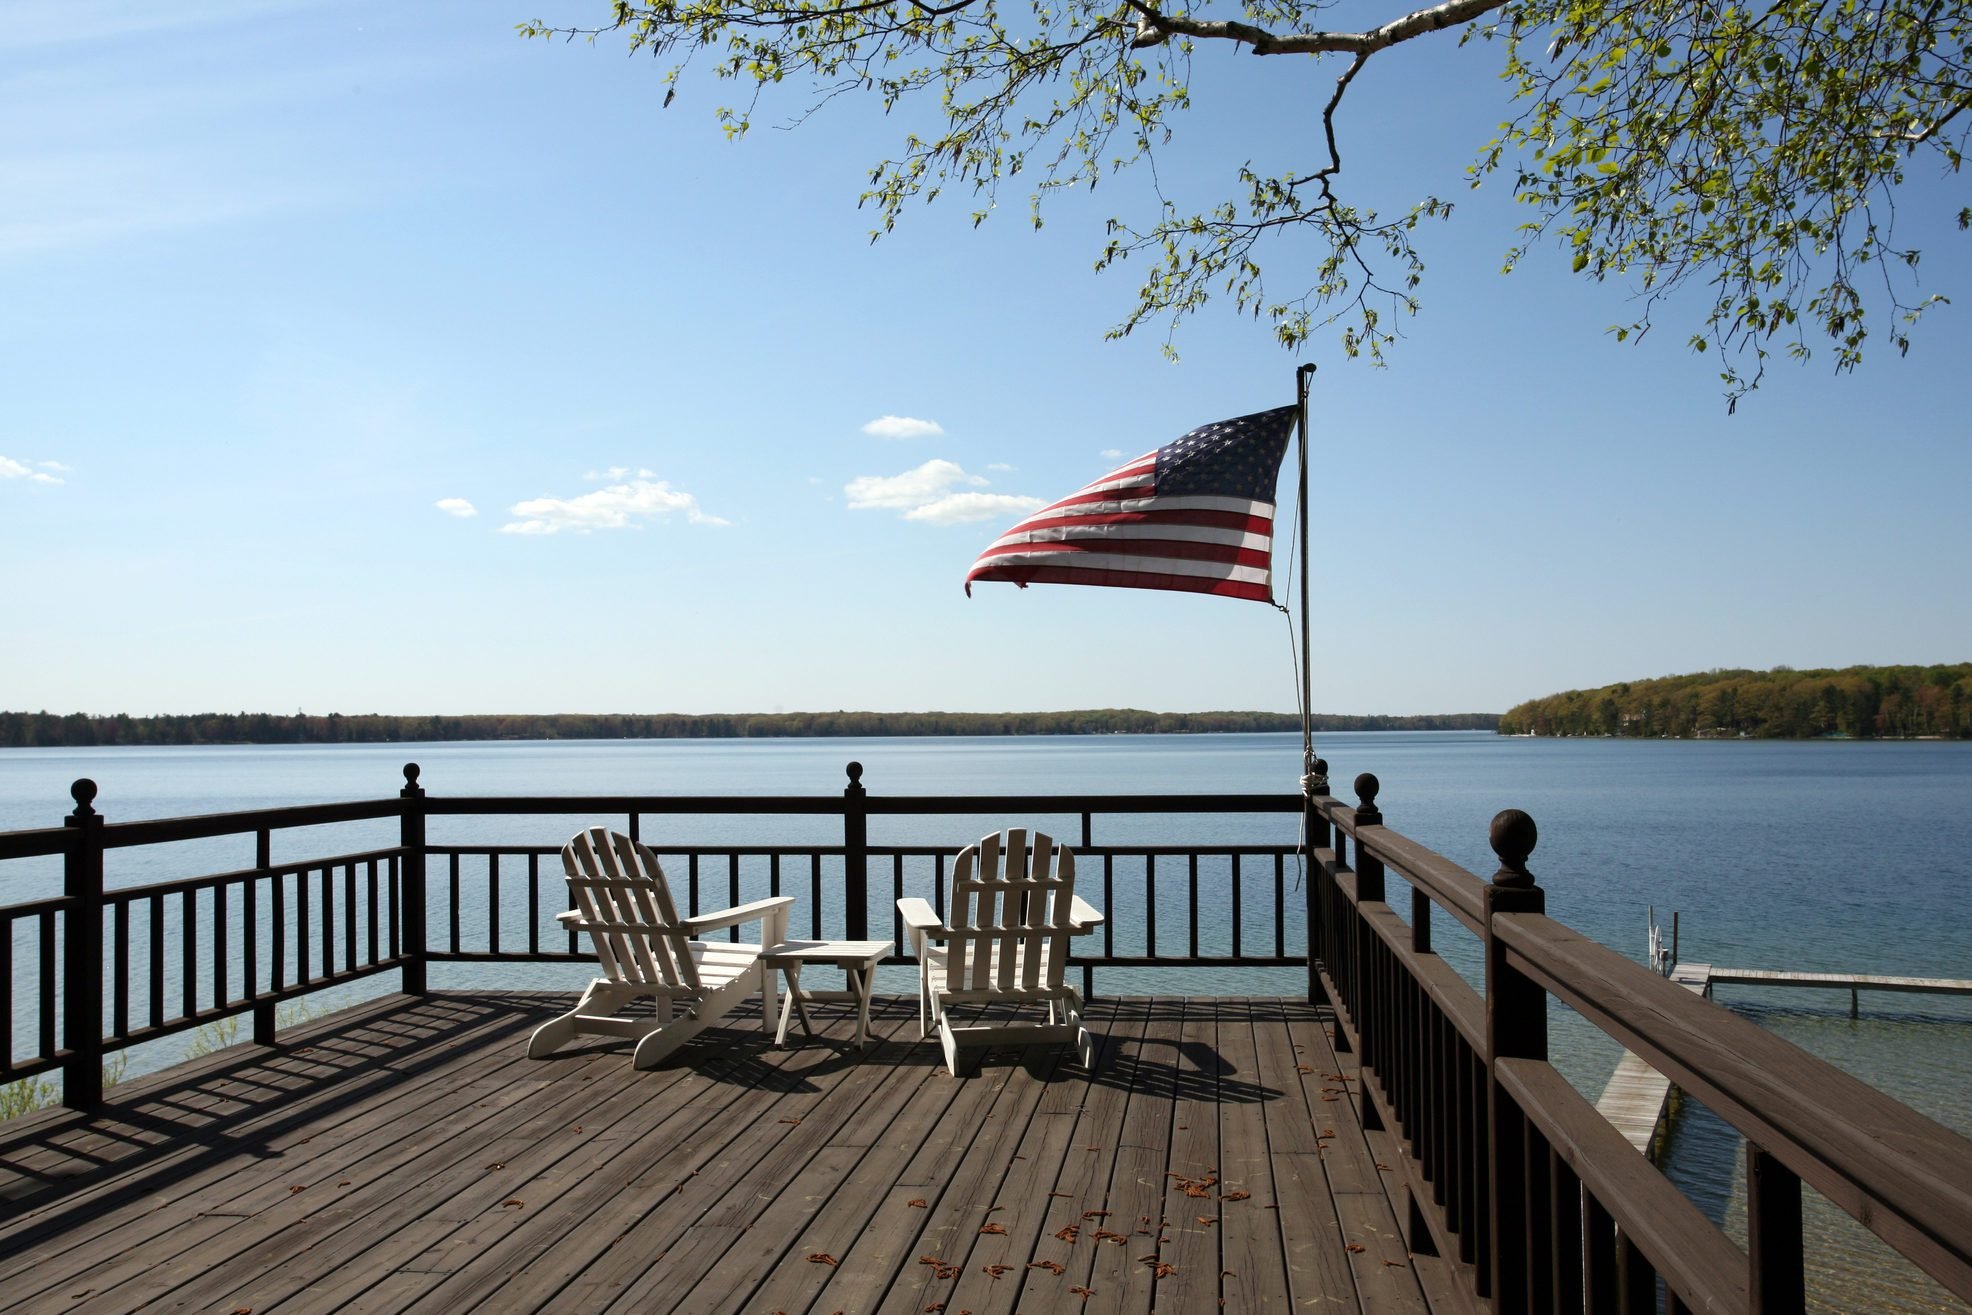 <p>Lake life is having its moment! Ideal for socially distanced outdoor getaways, lake retreats are enticing fans new and old. If you've been thinking of searching "lake house rentals near me," you're definitely not alone. If you're searching for "<a href="https://www.rd.com/list/swimming-lakes-near-me/">lakes near me</a>" for a staycation, that's great too. According to Vrbo's new 2021 Travel Trend Report, vacation destinations near lakes have seen an uptick in popularity throughout the pandemic, especially in areas with fishing, hiking, and other outdoor activities.</p> <p>Not sure where to start? We're here to help. Take your pick from rentals with cozy cottagecore design, stunning modern architecture, and classic lakeside cabin decor. It just might be the most scenic, quiet, and relaxing getaway you've ever had. If you're also looking for "<a href="https://www.rd.com/list/best-rv-parks-every-state/">RV parks near me</a>" check out this list of the best ones in every state.</p>